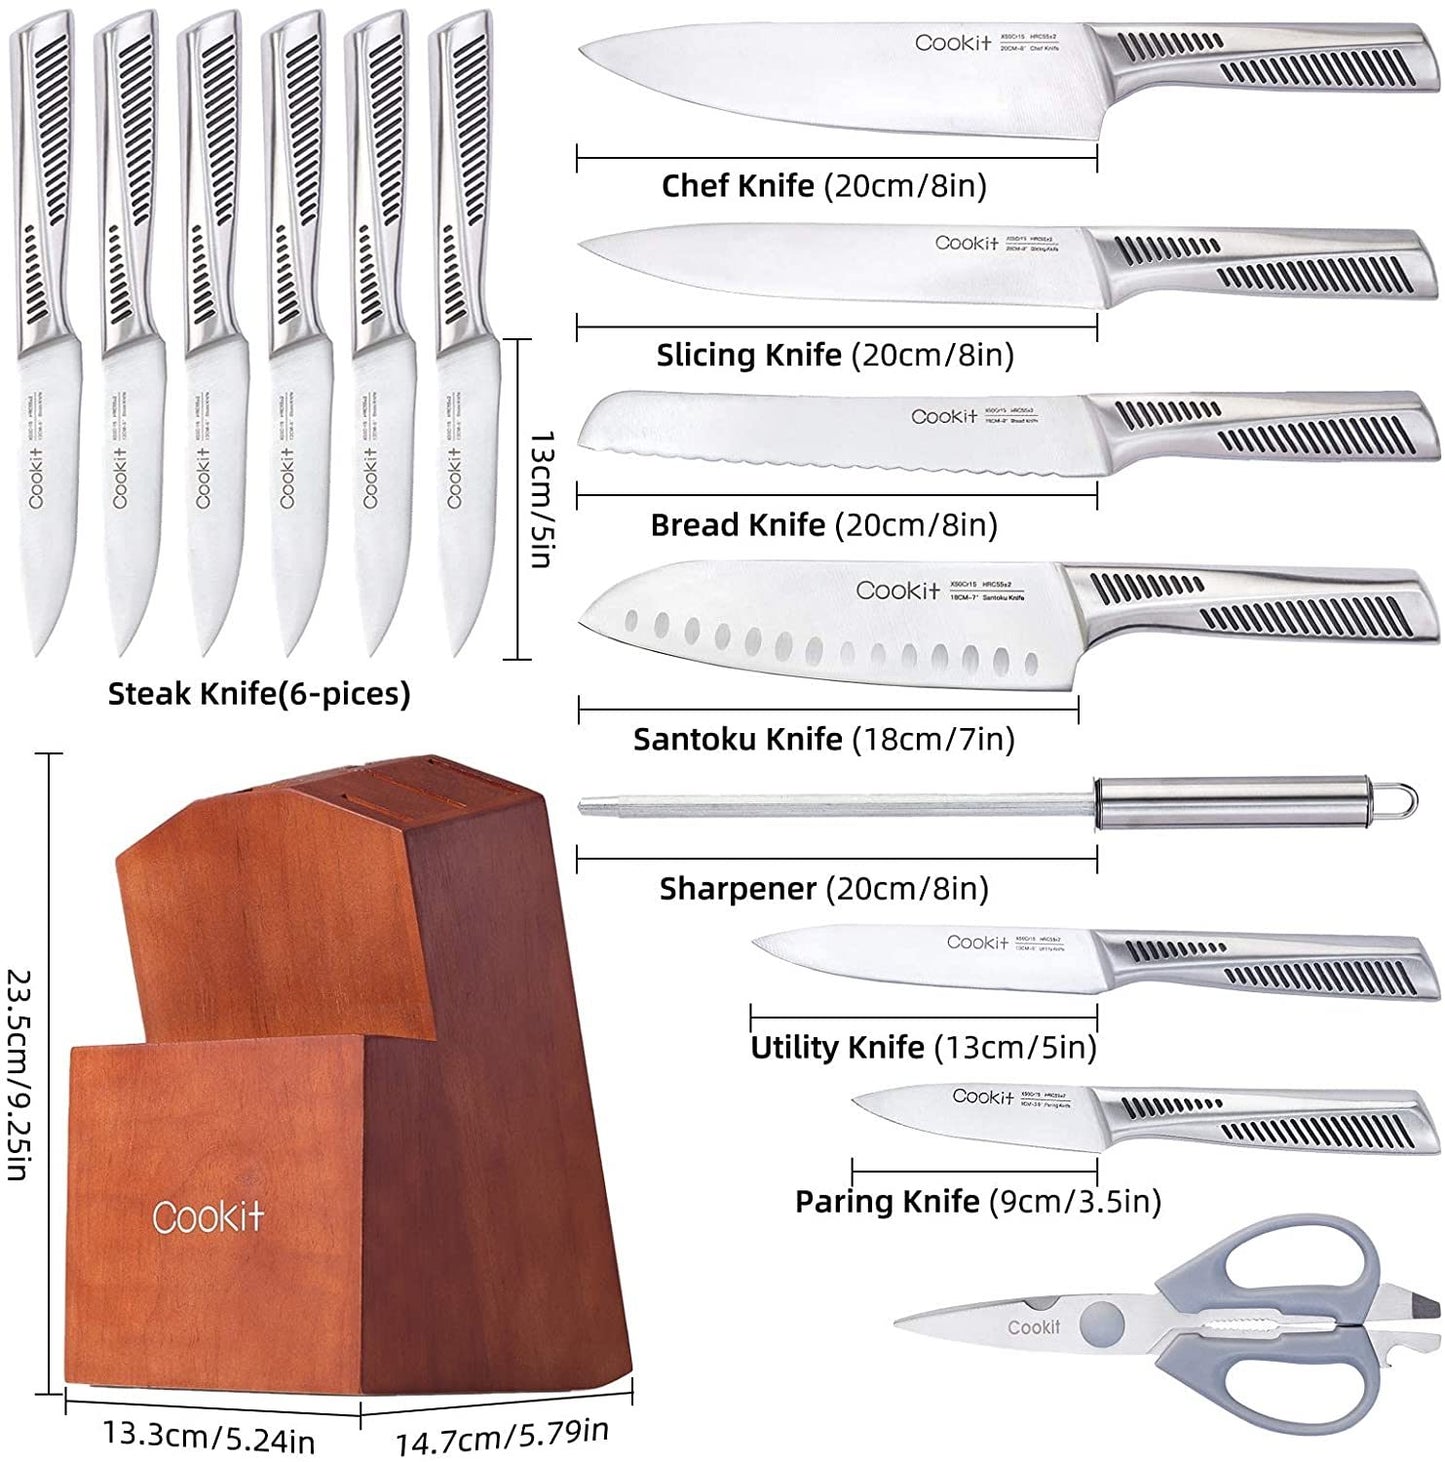 Kitchen Knife Set, 15 Piece, Stainless Steel Hollow Handle Cutlery with Manual Sharpener